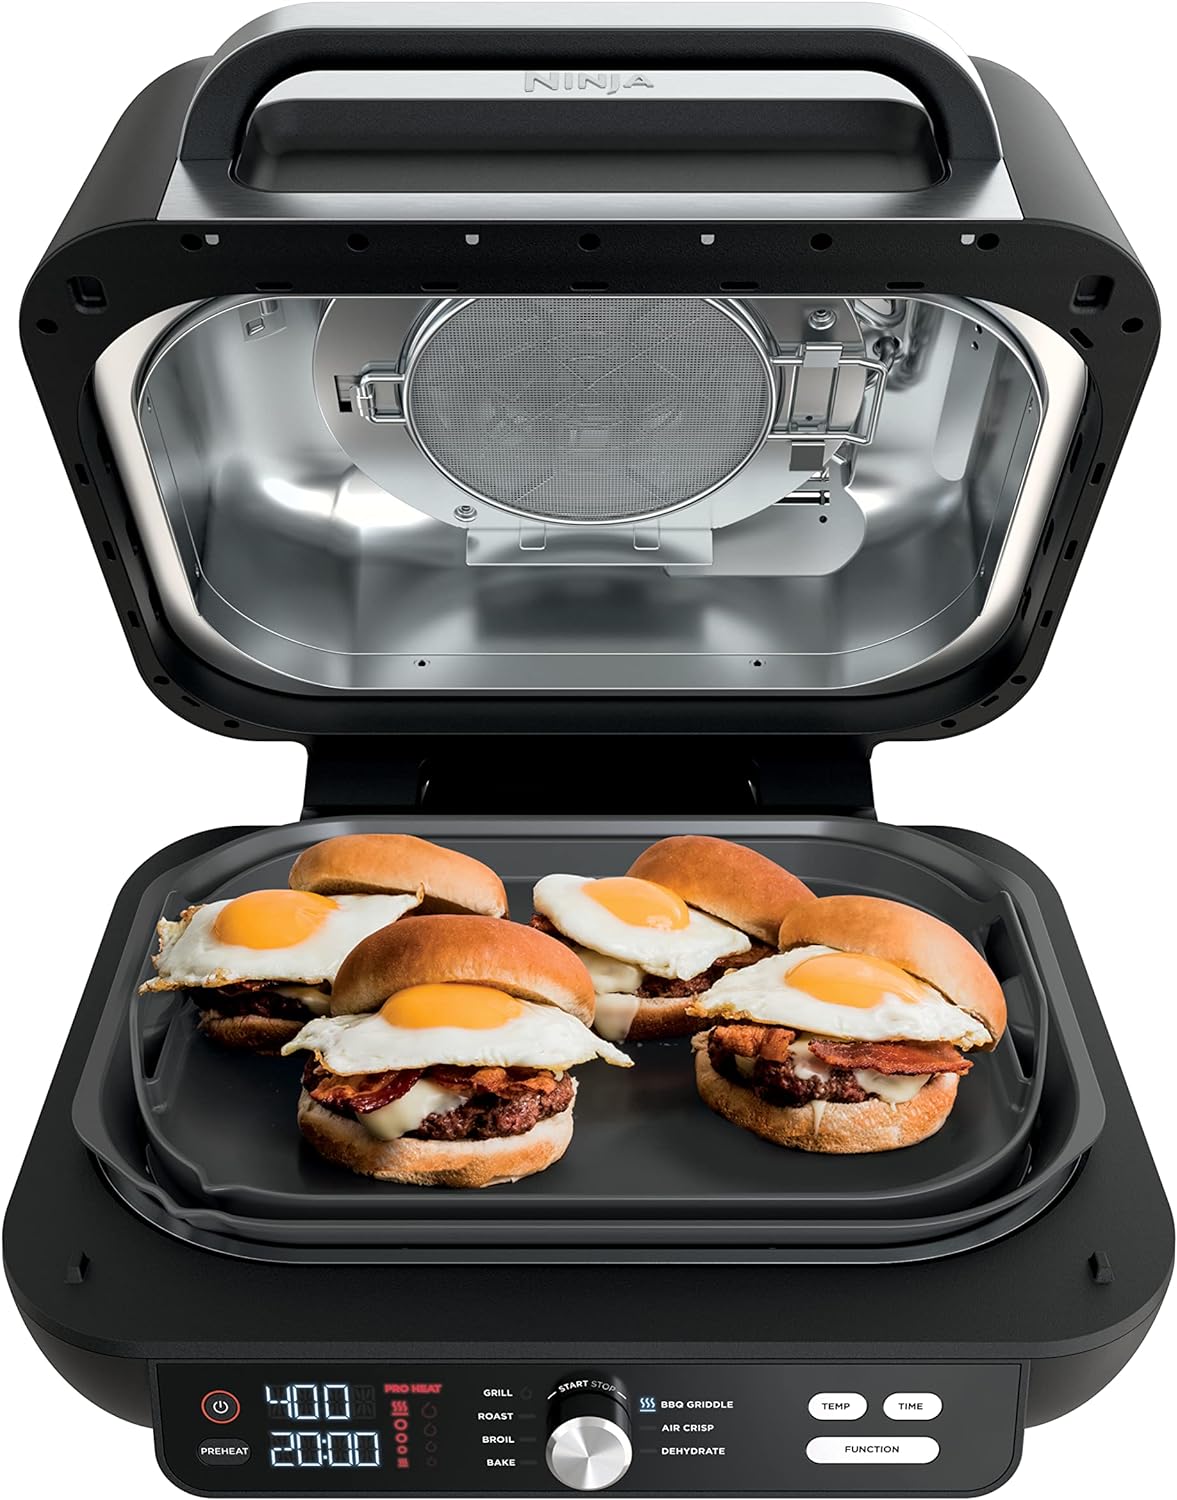 Ninja IG601 Foodi XL 7-in-1 Indoor Grill Combo, use Opened or Closed, Air Fry, Dehydrate & More